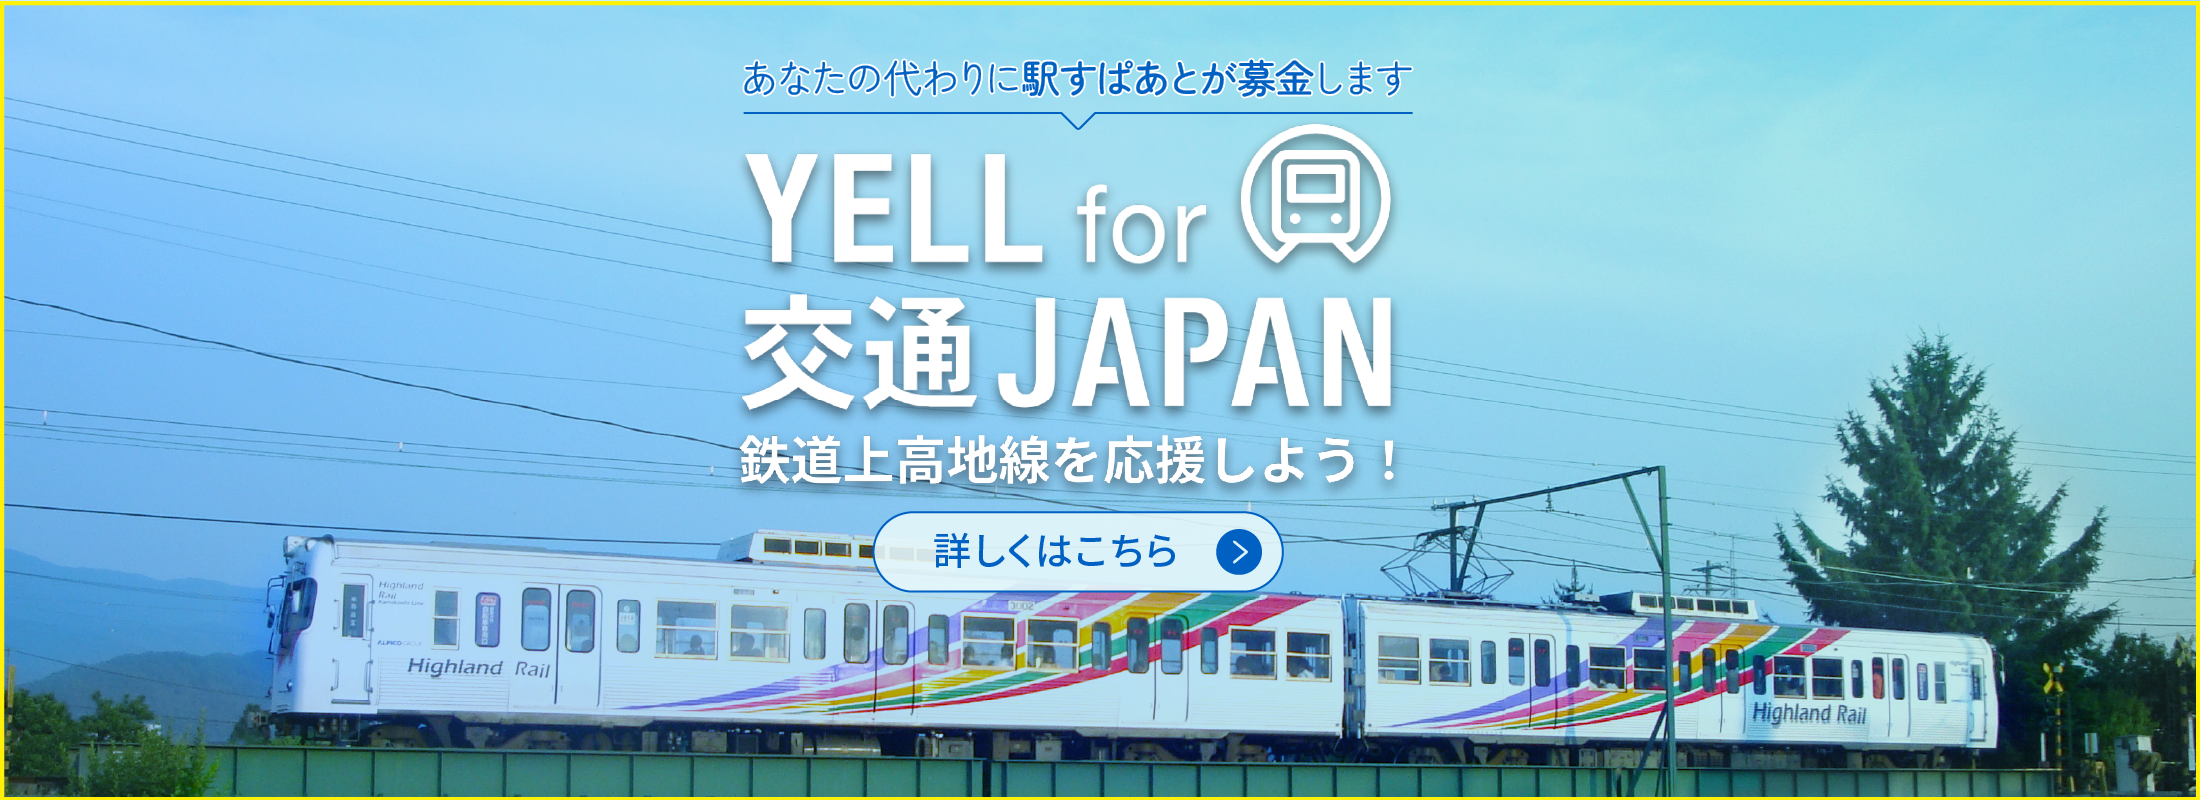 YELL for 交通JAPAN